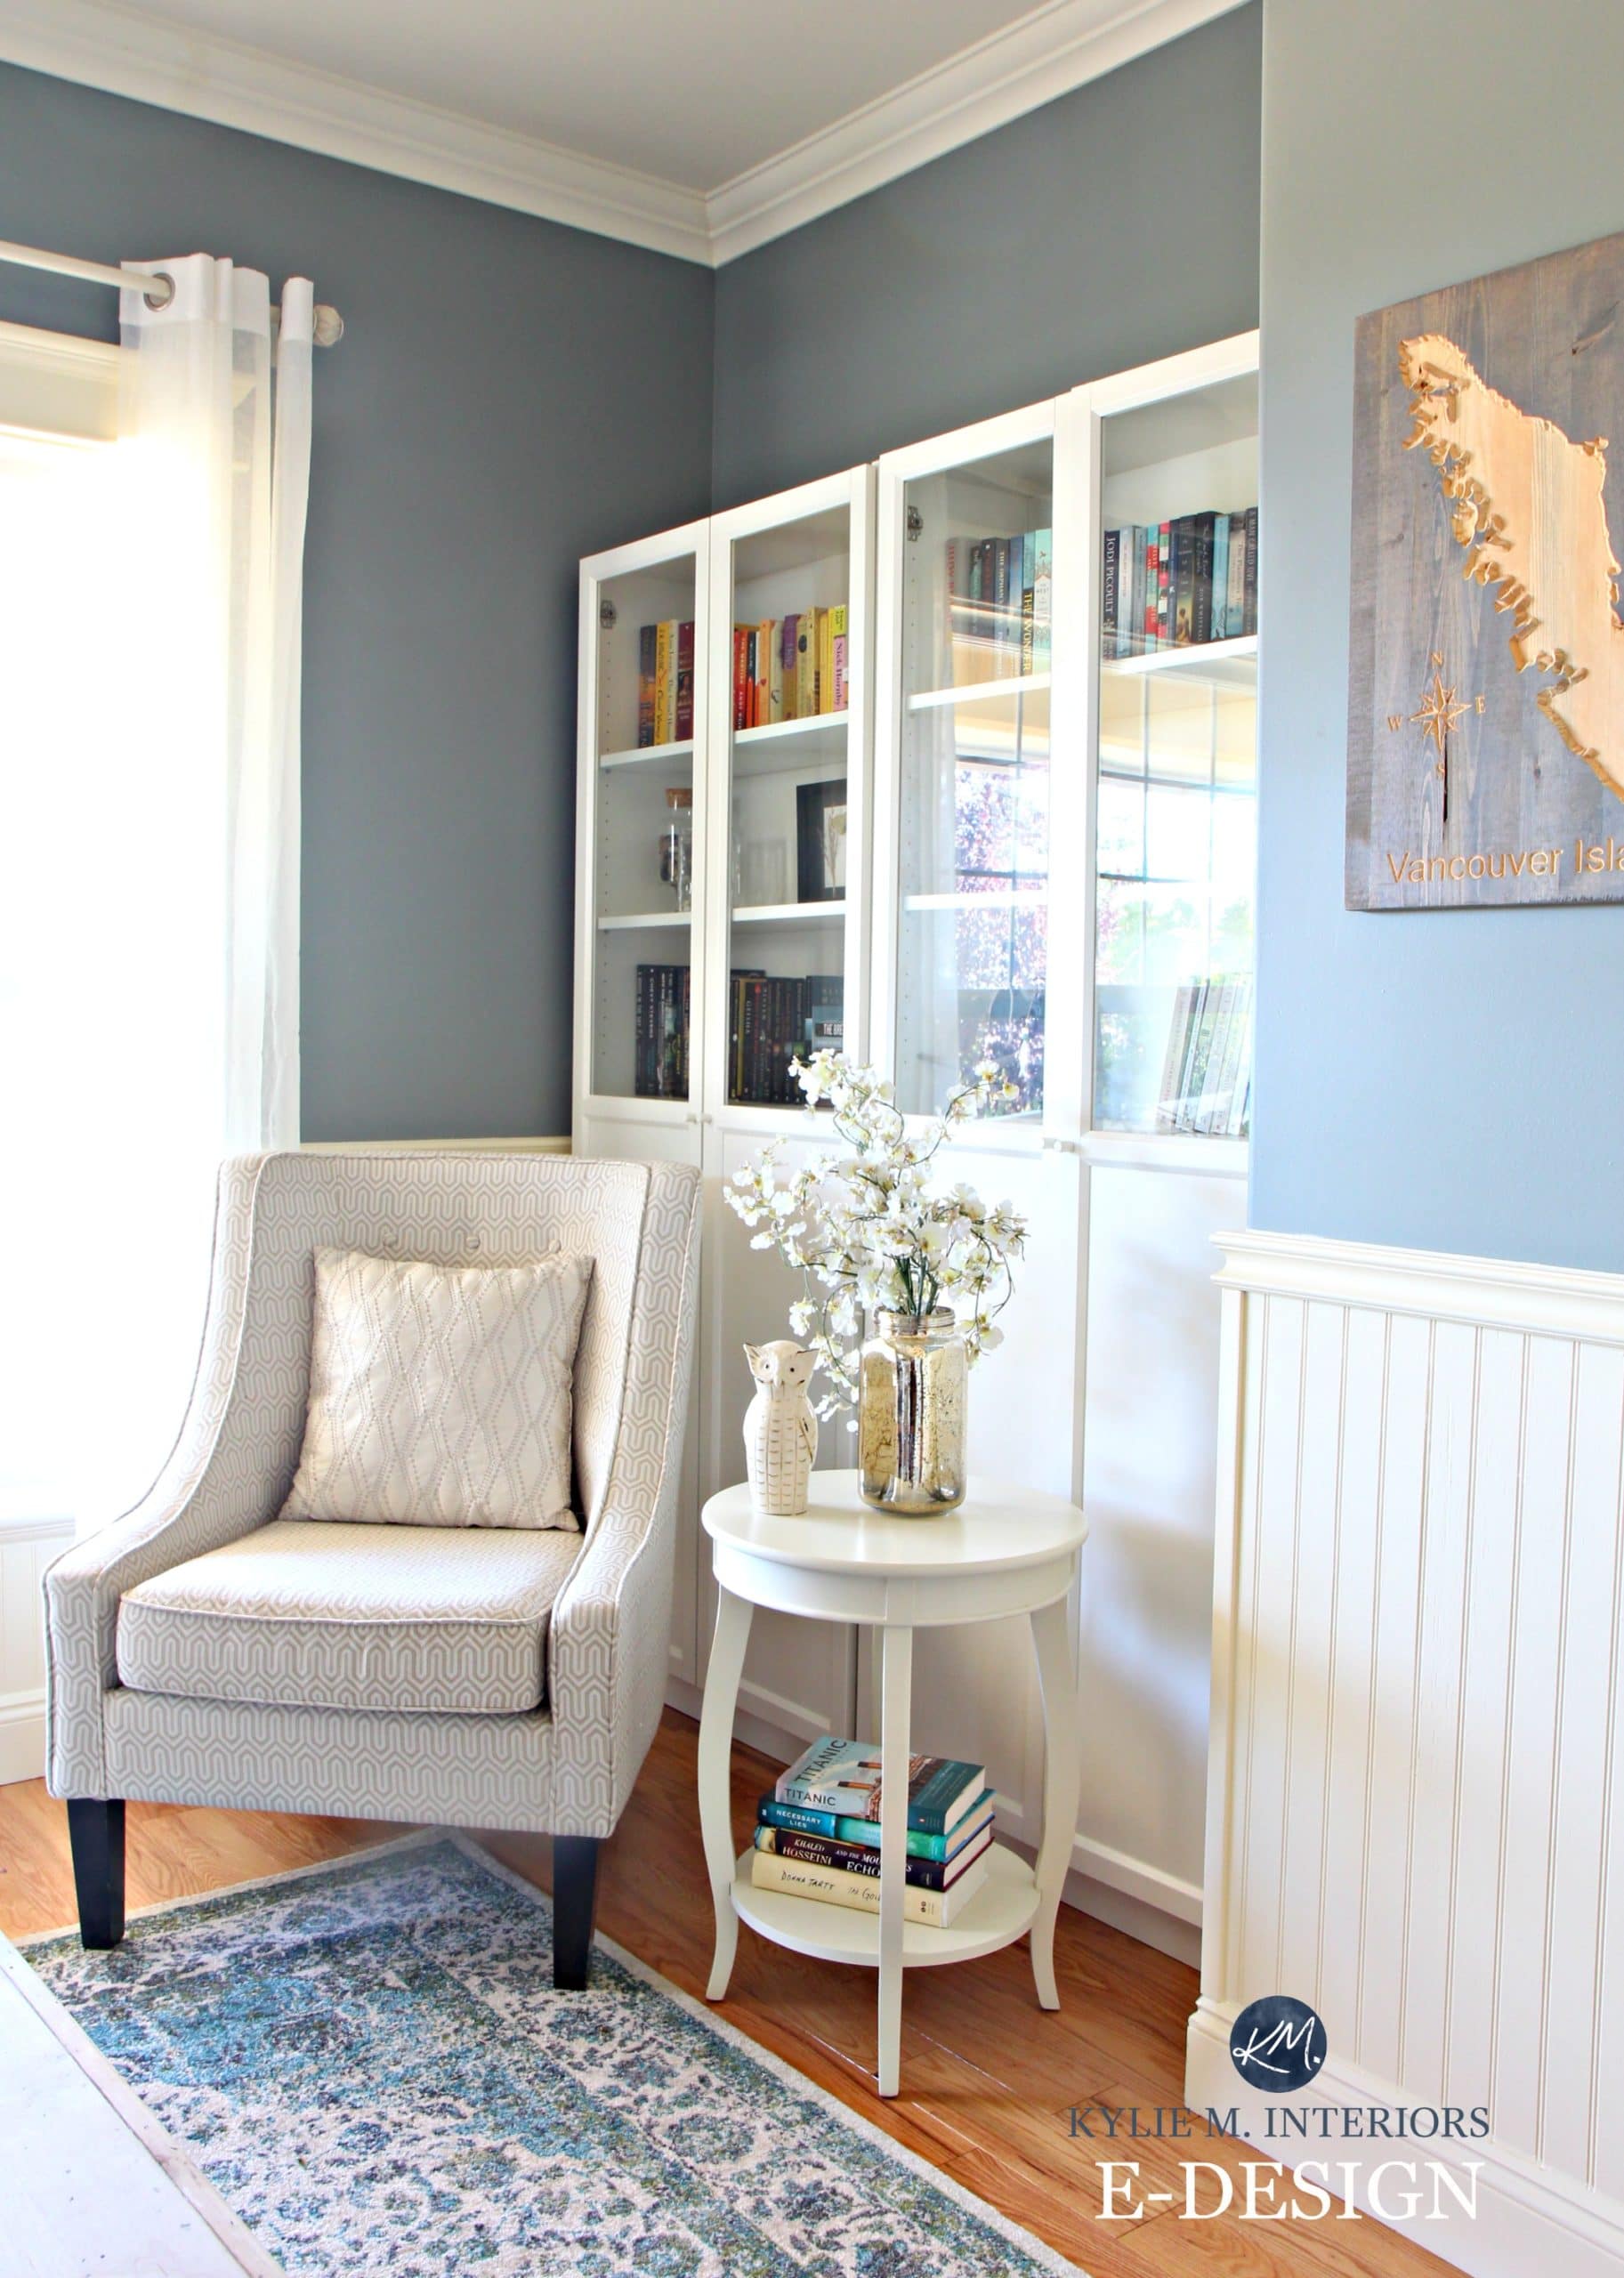 Best blue gray paint colour. Benjamin Moore Sea Pine, Stonybrook, Ikea bookshelves and accent chair. Cream white wainscoting. Kylie M E-design